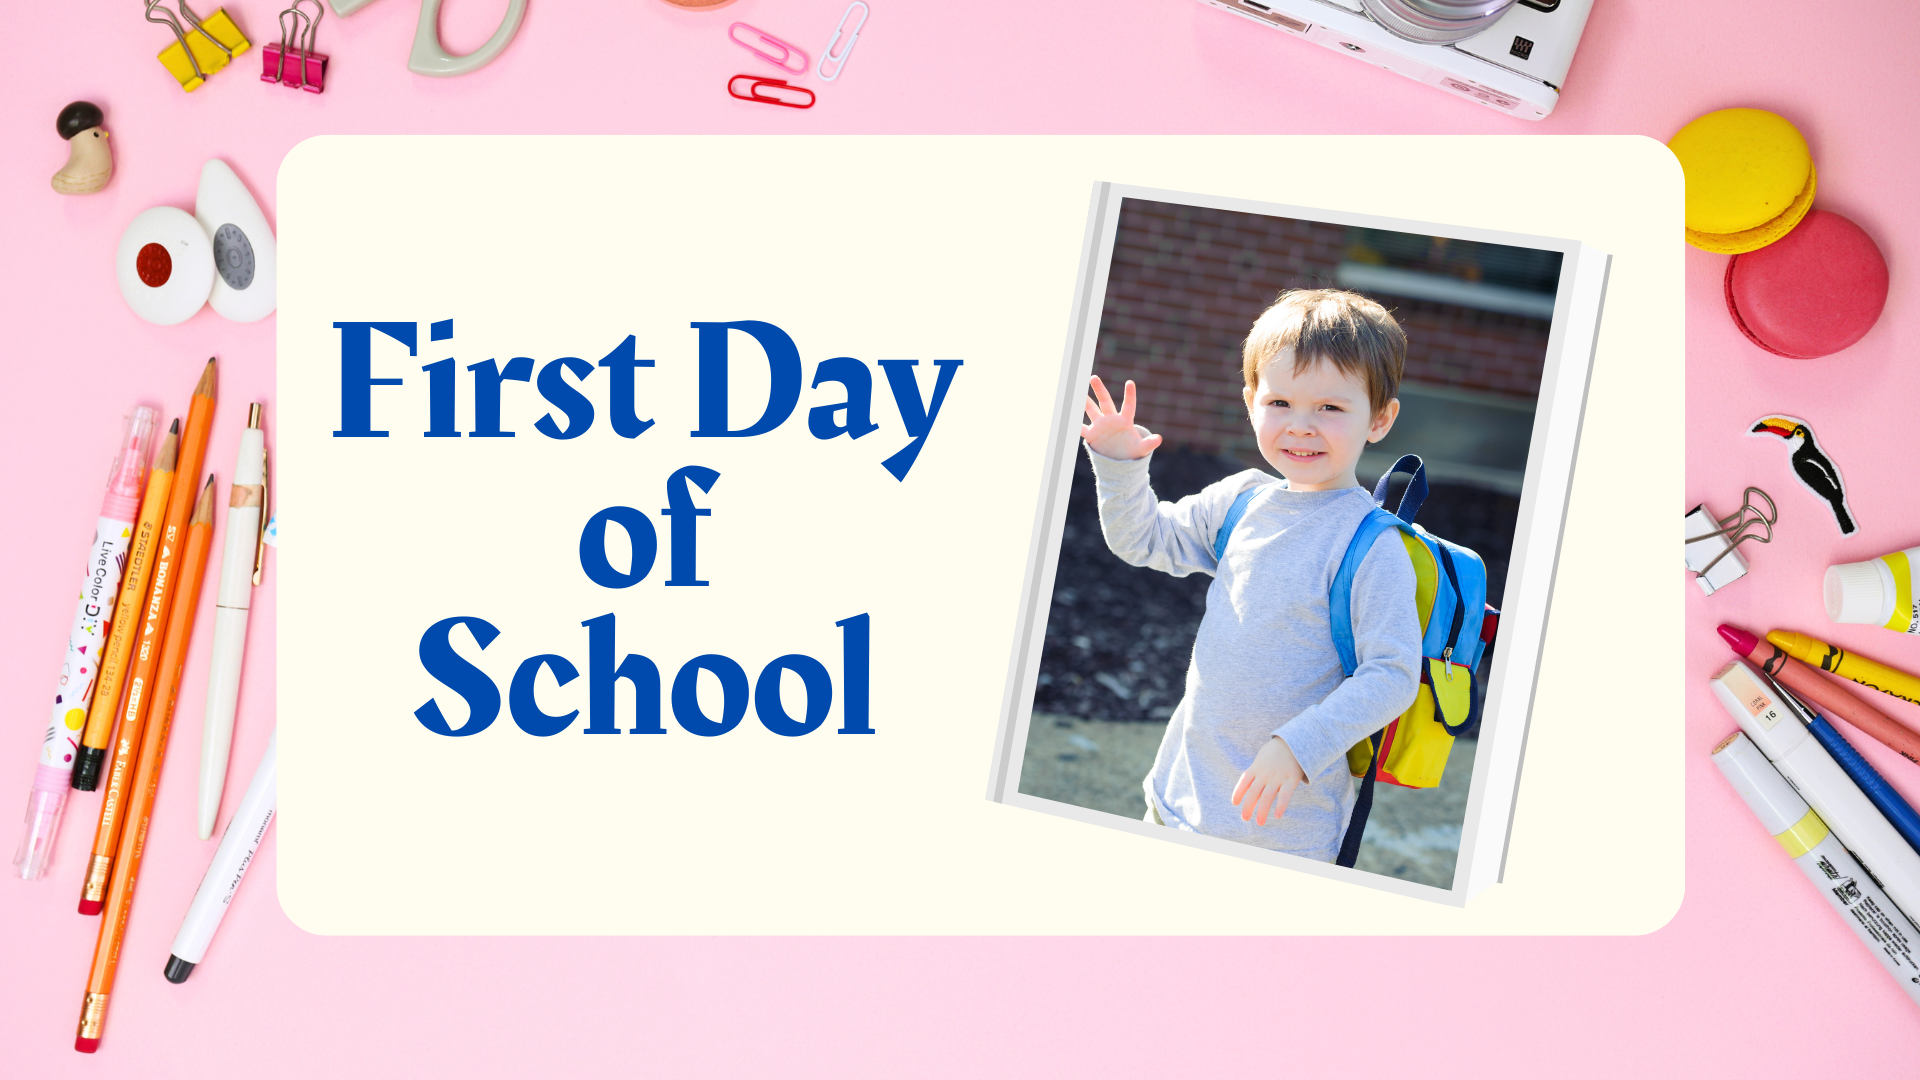 How To Prepare Your Child Mentally For First Day of School